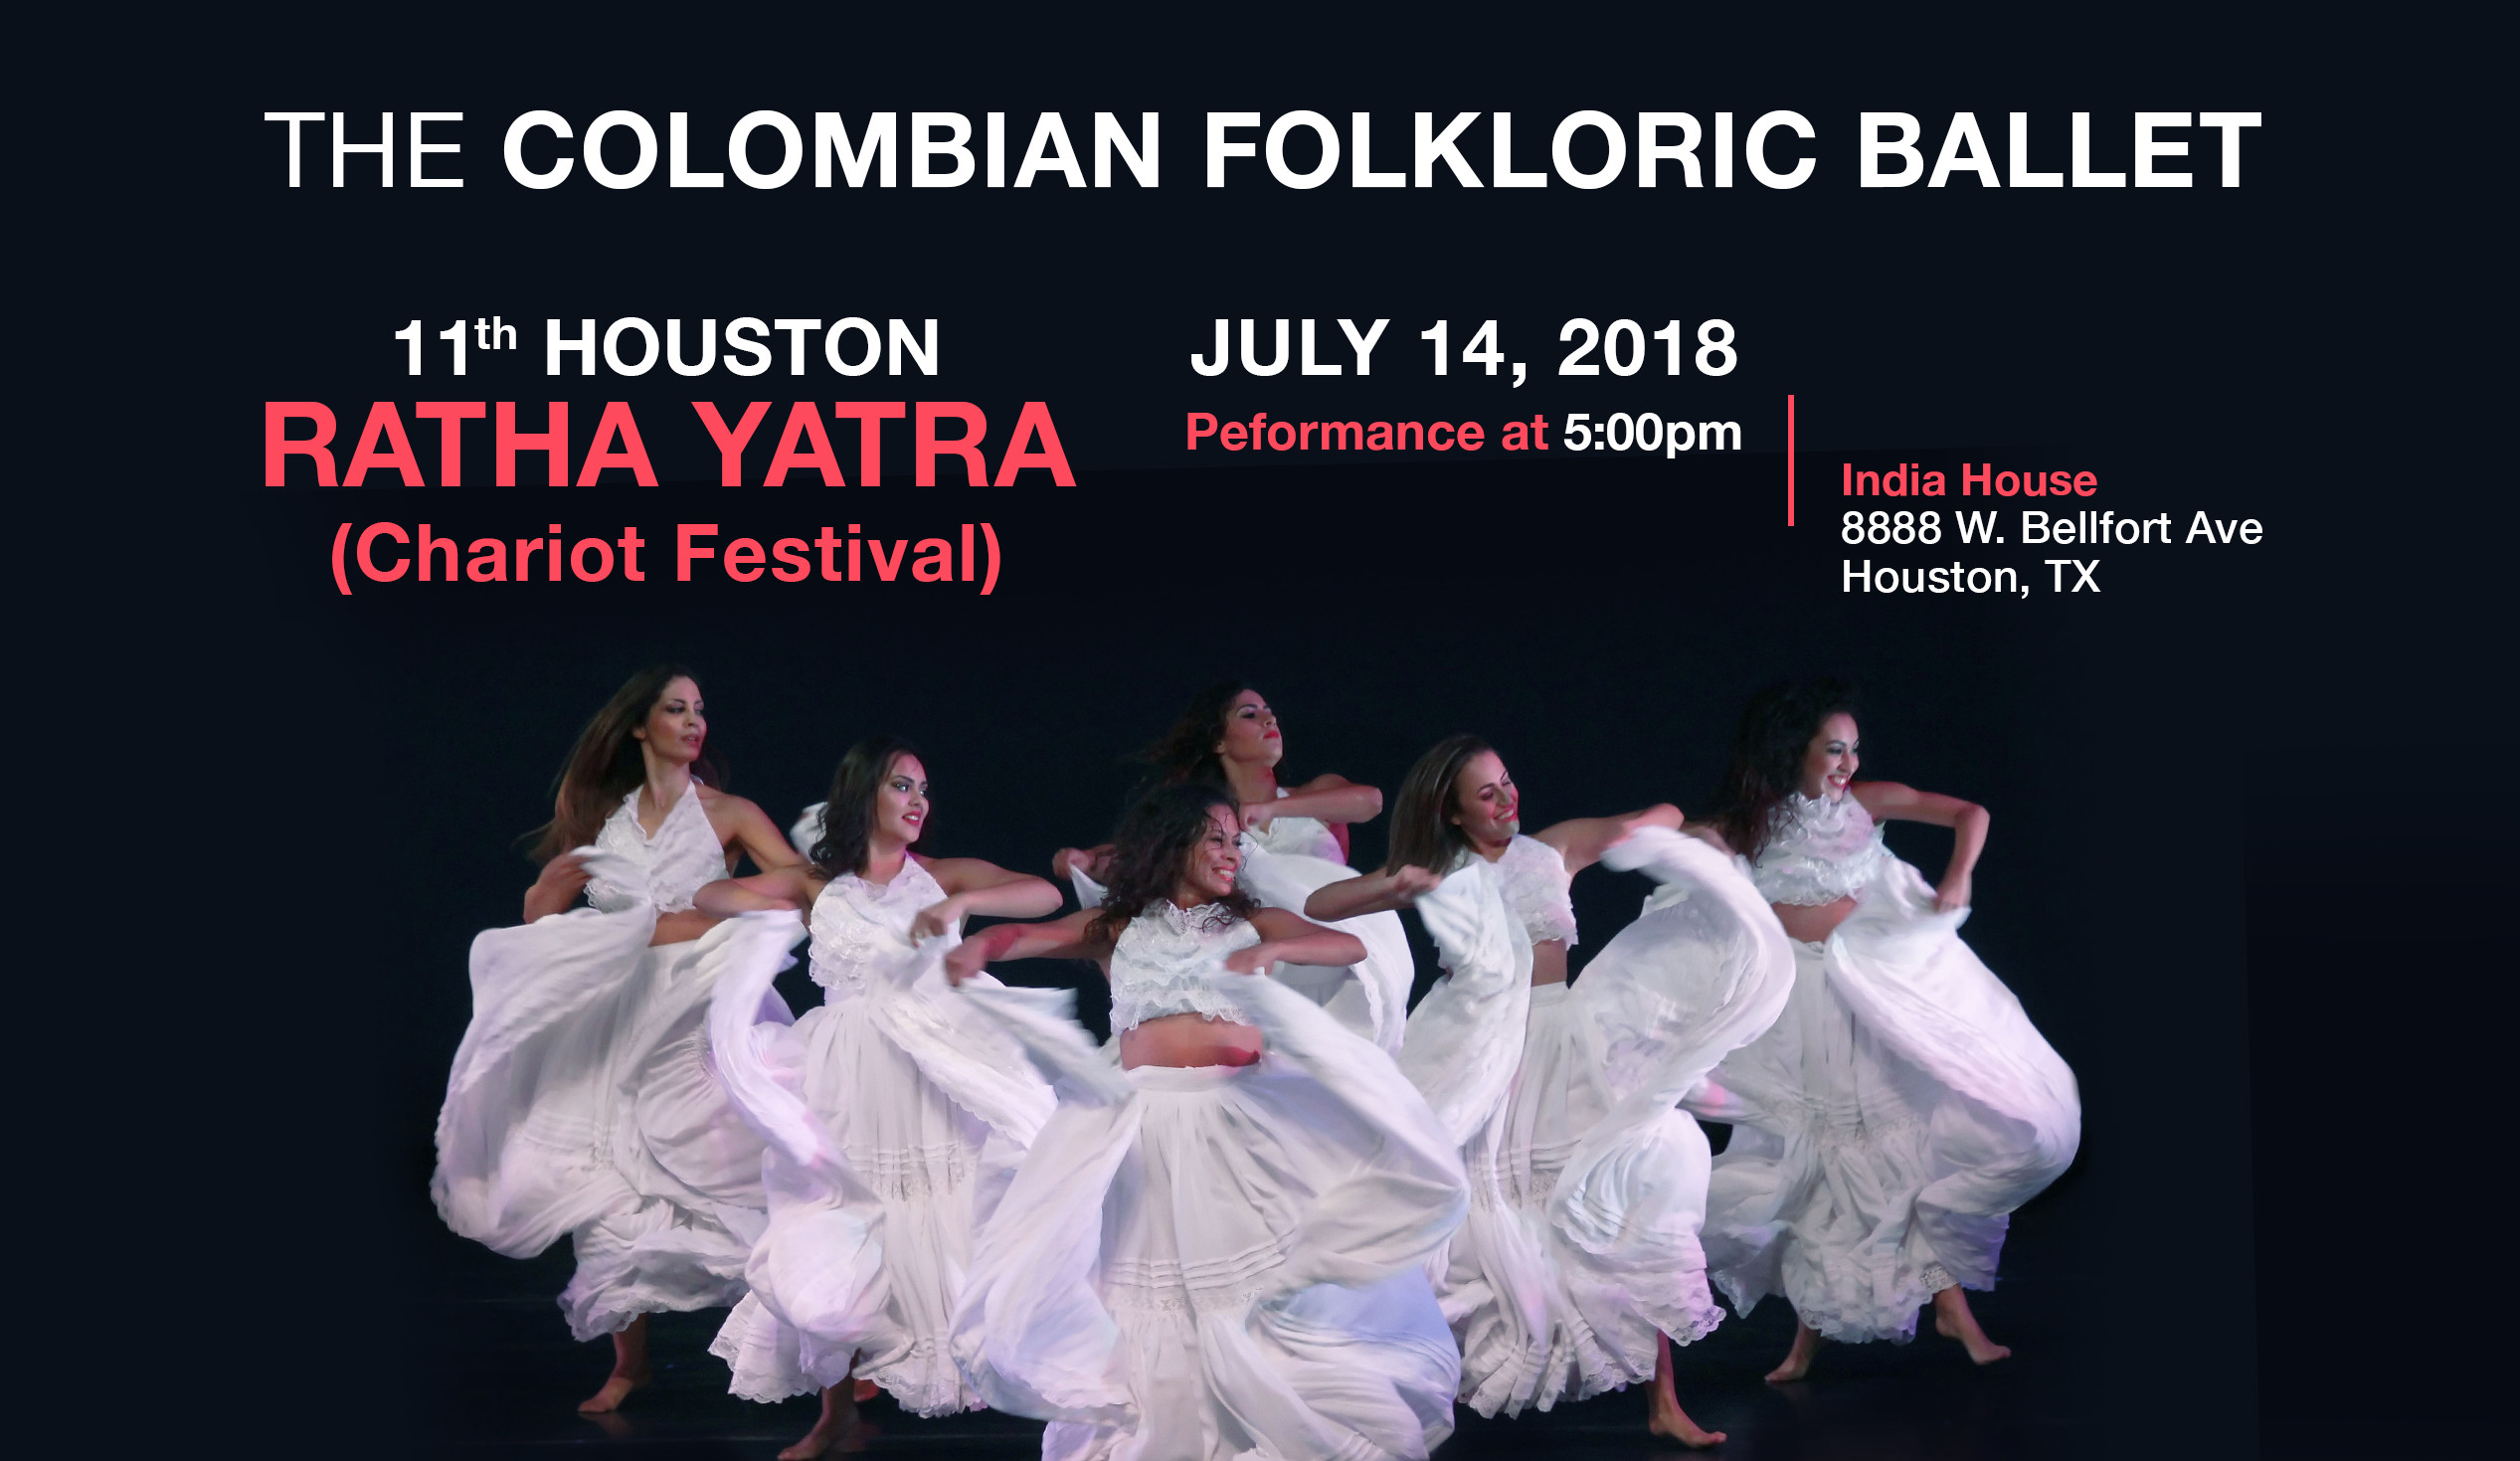 The Colombian Folkloric Ballet—11th Houston Ratha Yatra (Chariot Festival) 2018